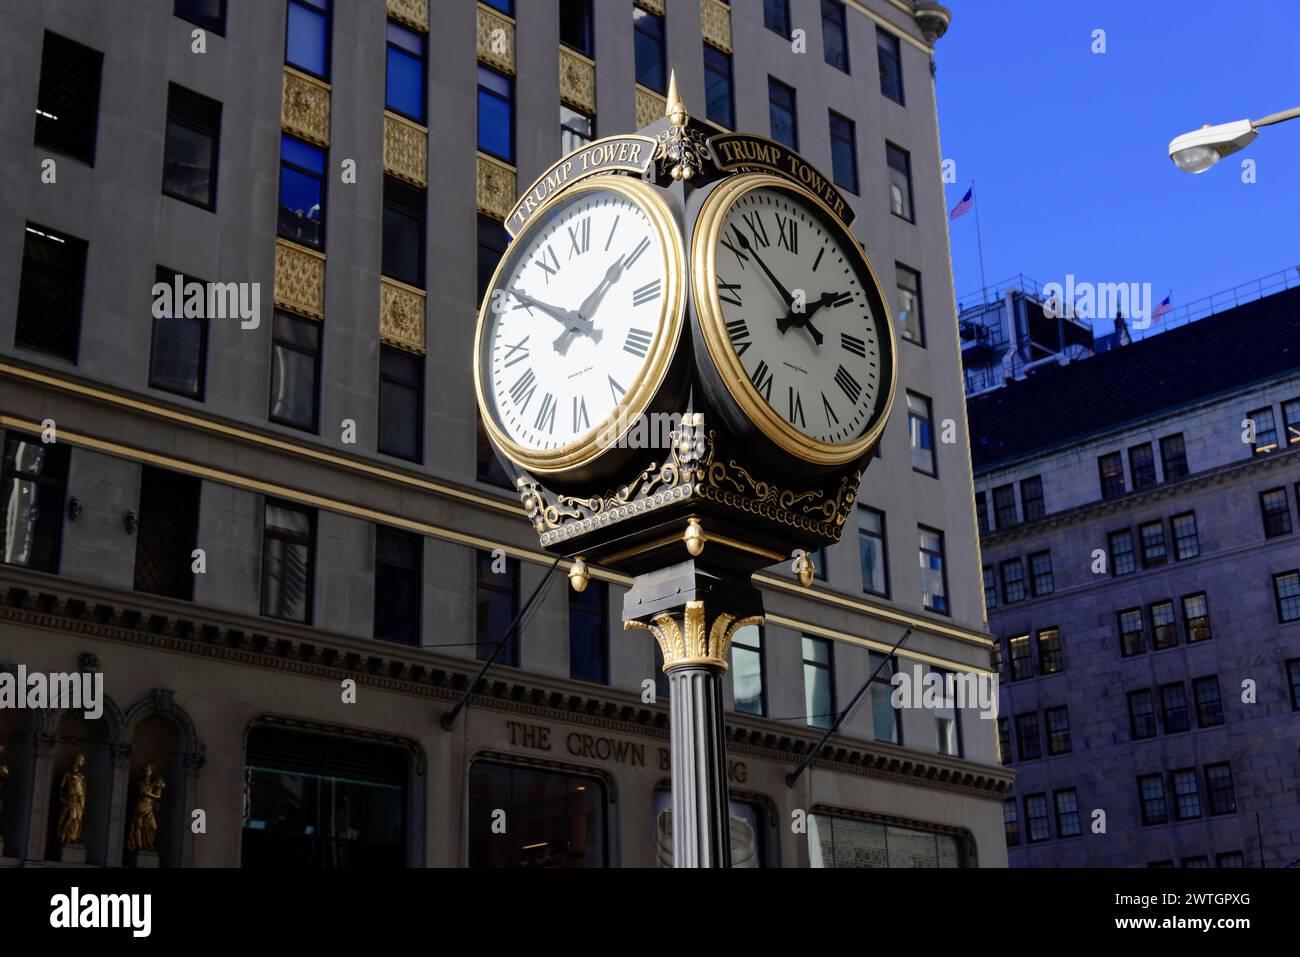 Large golden street clock with four dials in front of a building under daylight, Manhattan, New York City, New York, USA, North America Stock Photo